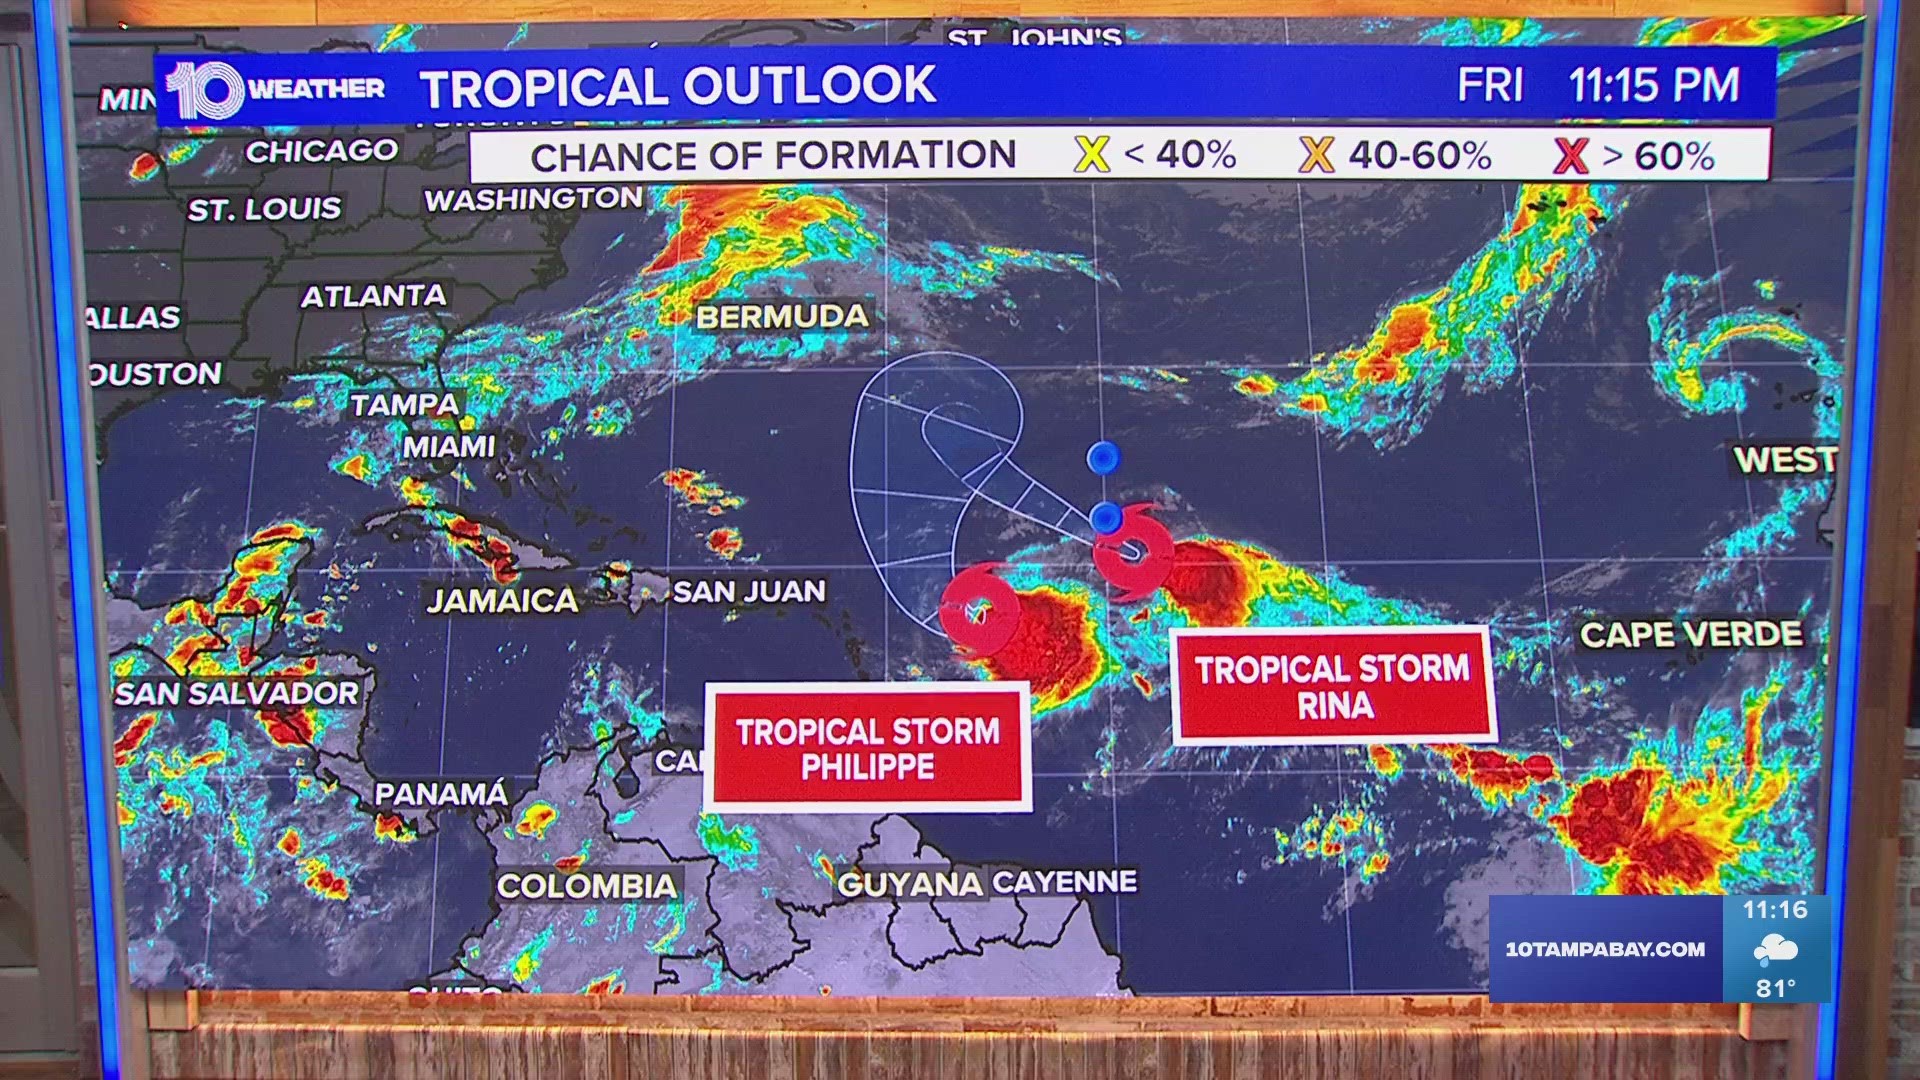 At this time, there are no tropical threats for the Sunshine State.